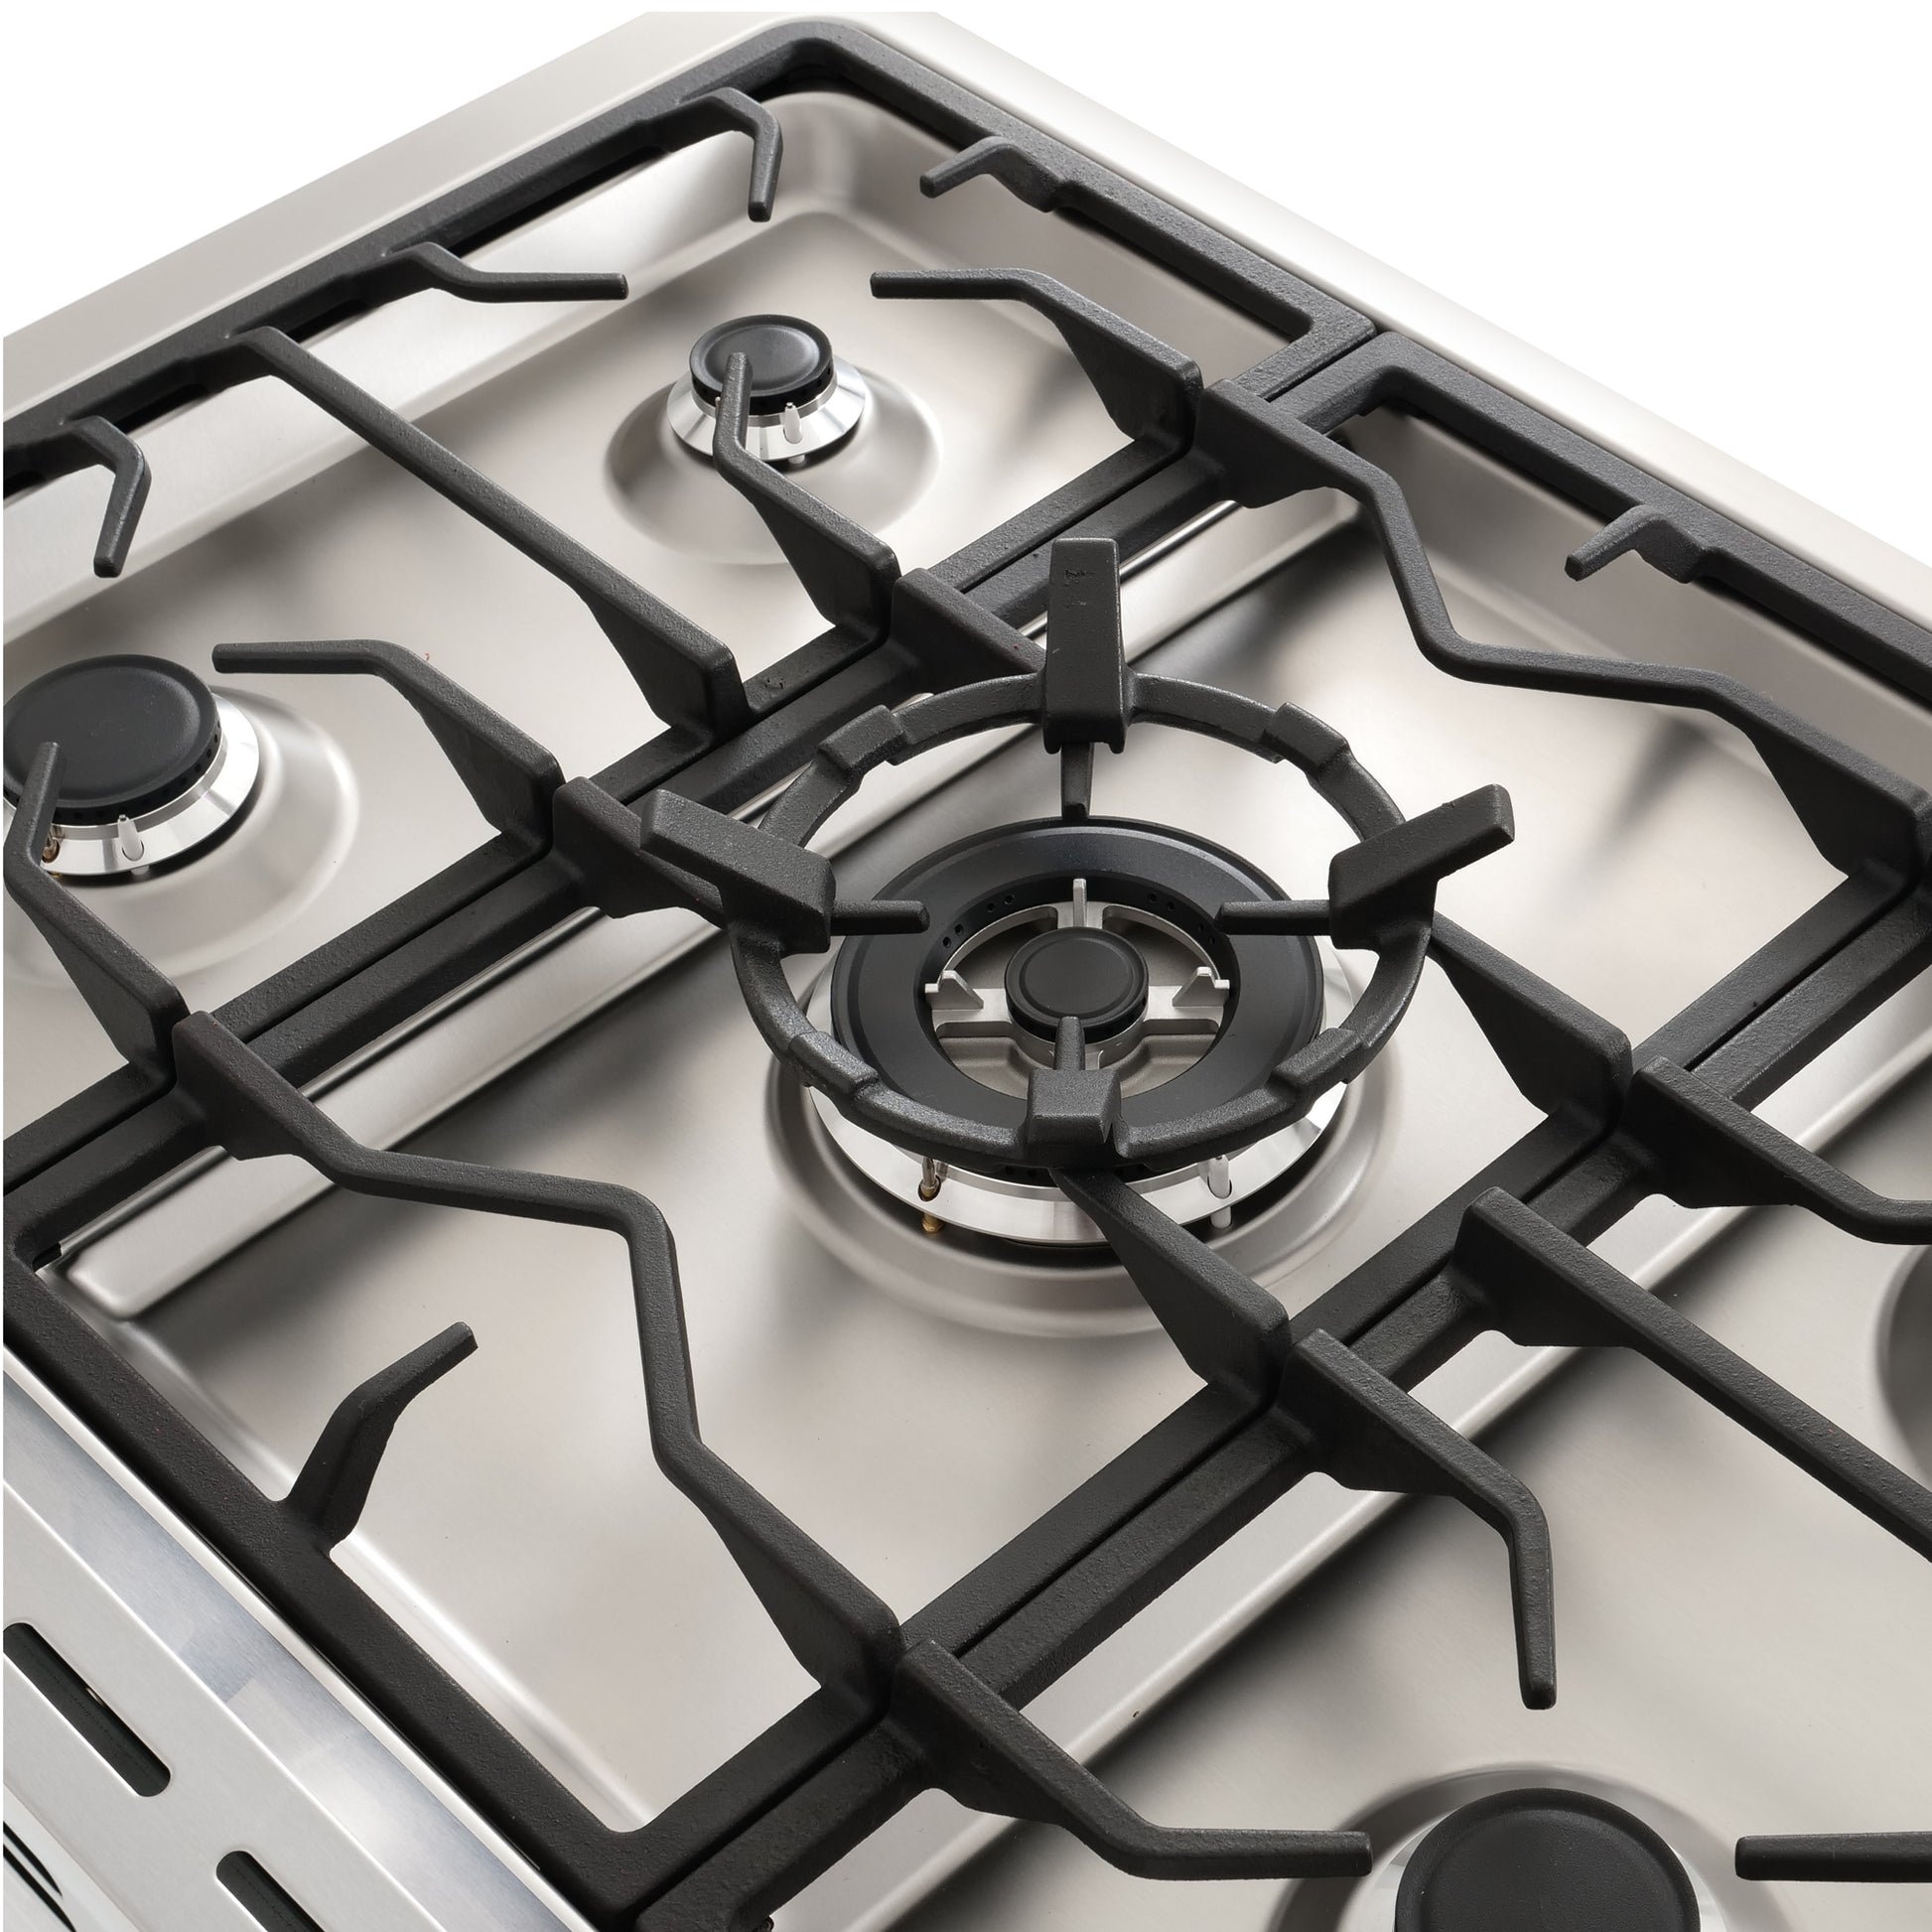 Cosmo 36 in. 3.8 cu. ft. Single Oven Gas Range in Stainless Steel with 5 Burner Cooktop and Heavy Duty Cast Iron Grates